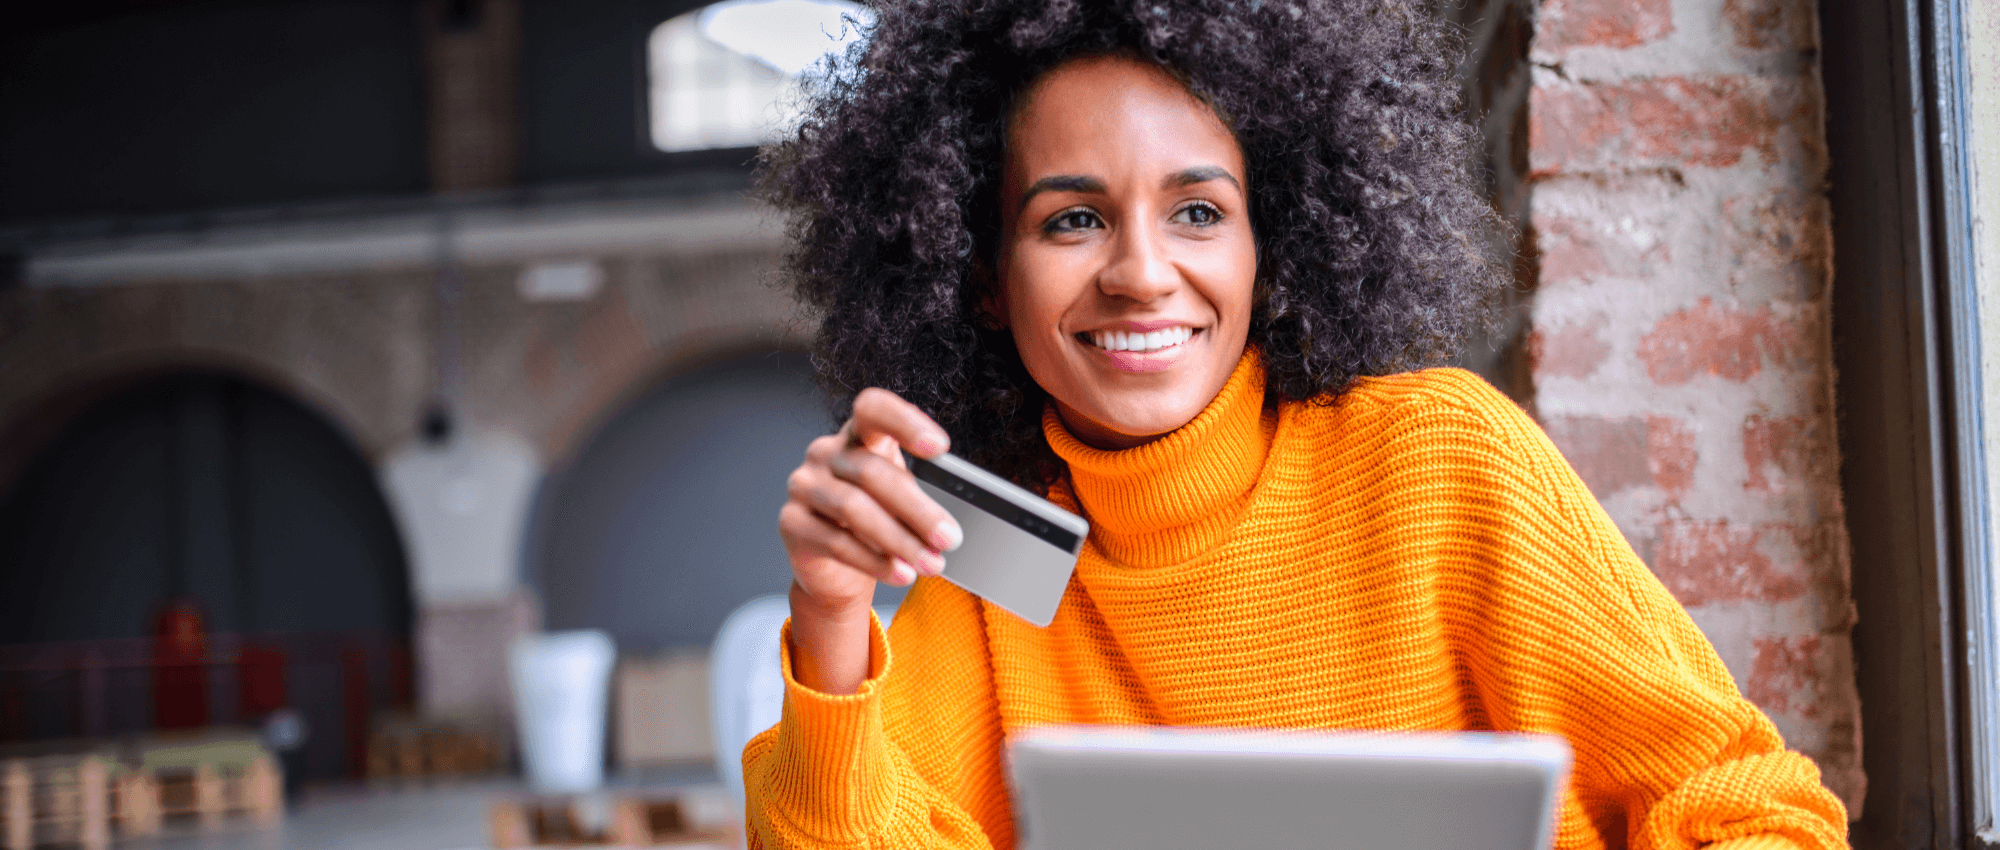 woman with laptop and credit card